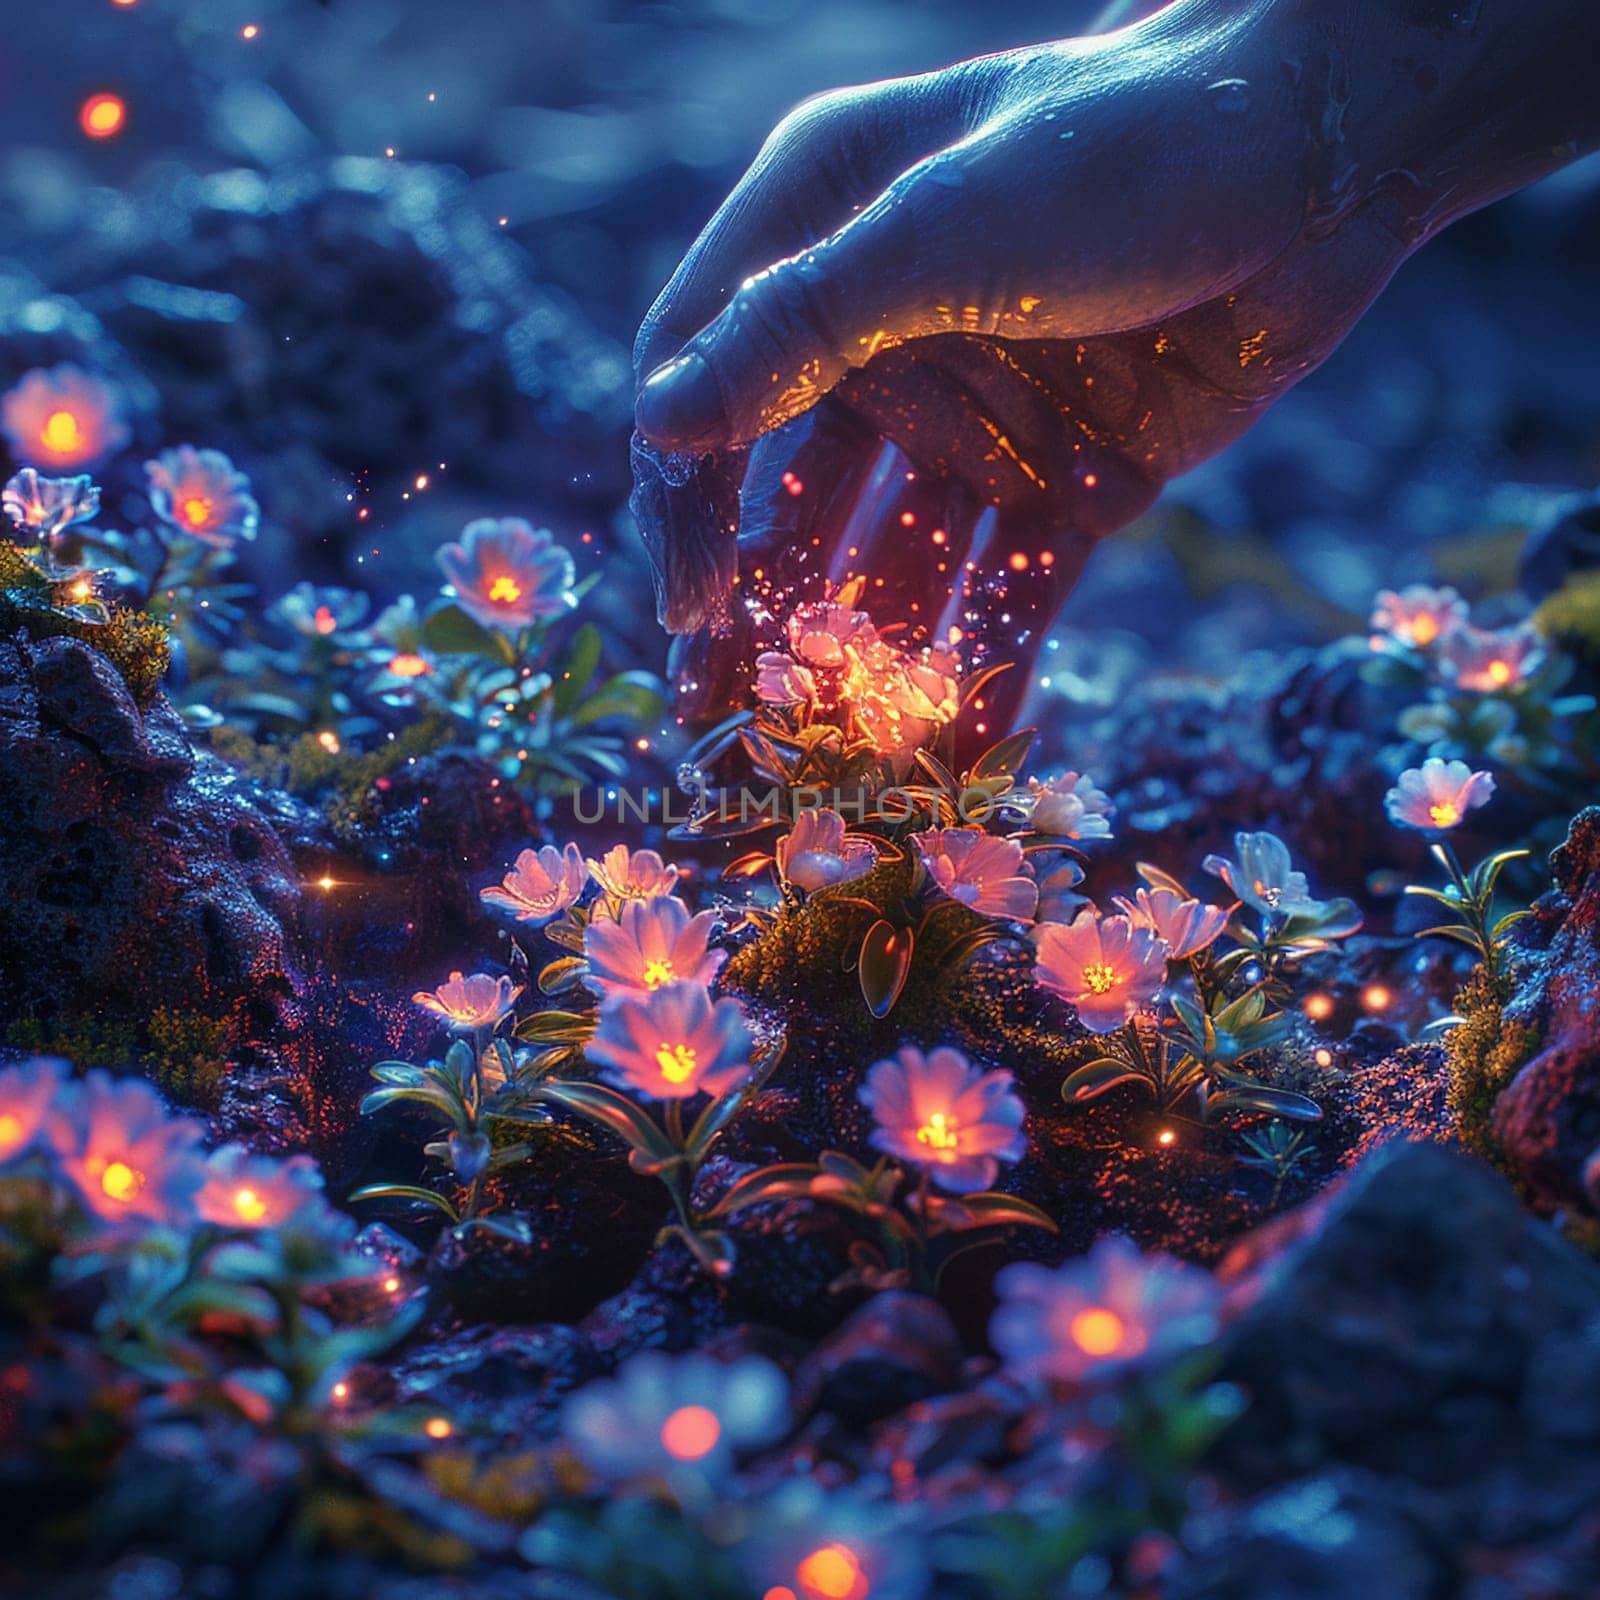 Hands planting a magical seed that glows with life by Benzoix